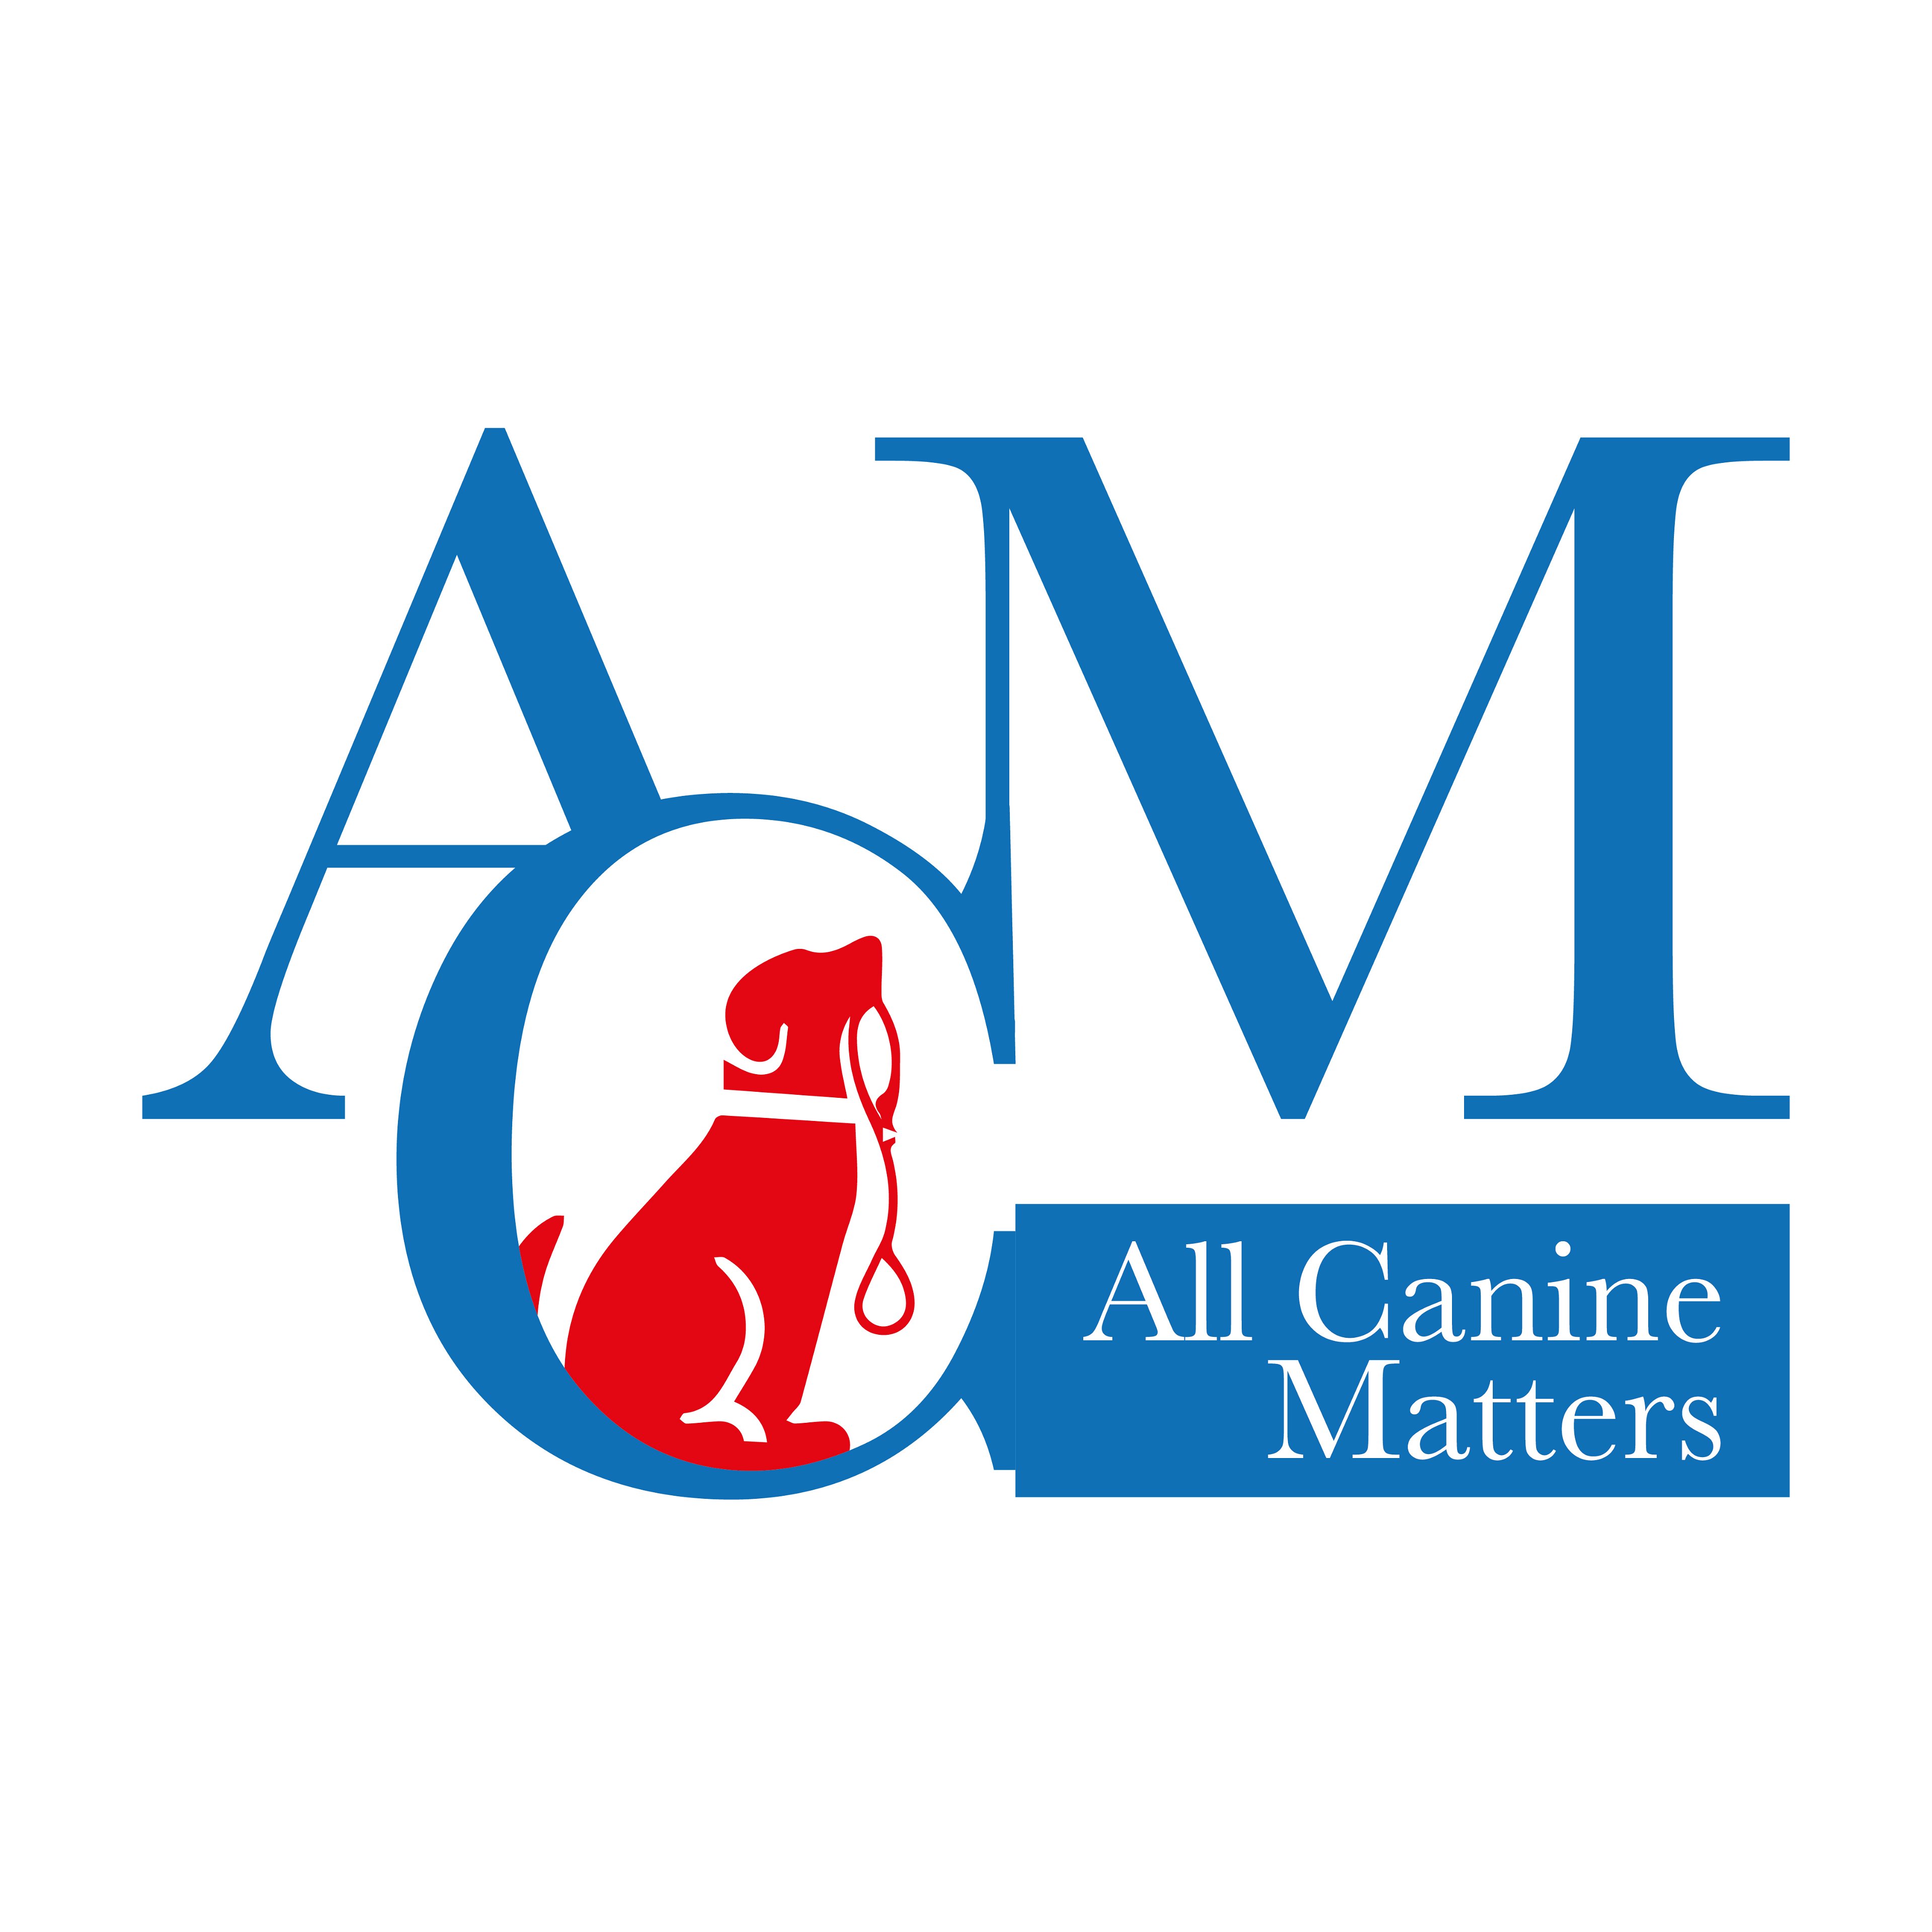 All Canine Matters logo